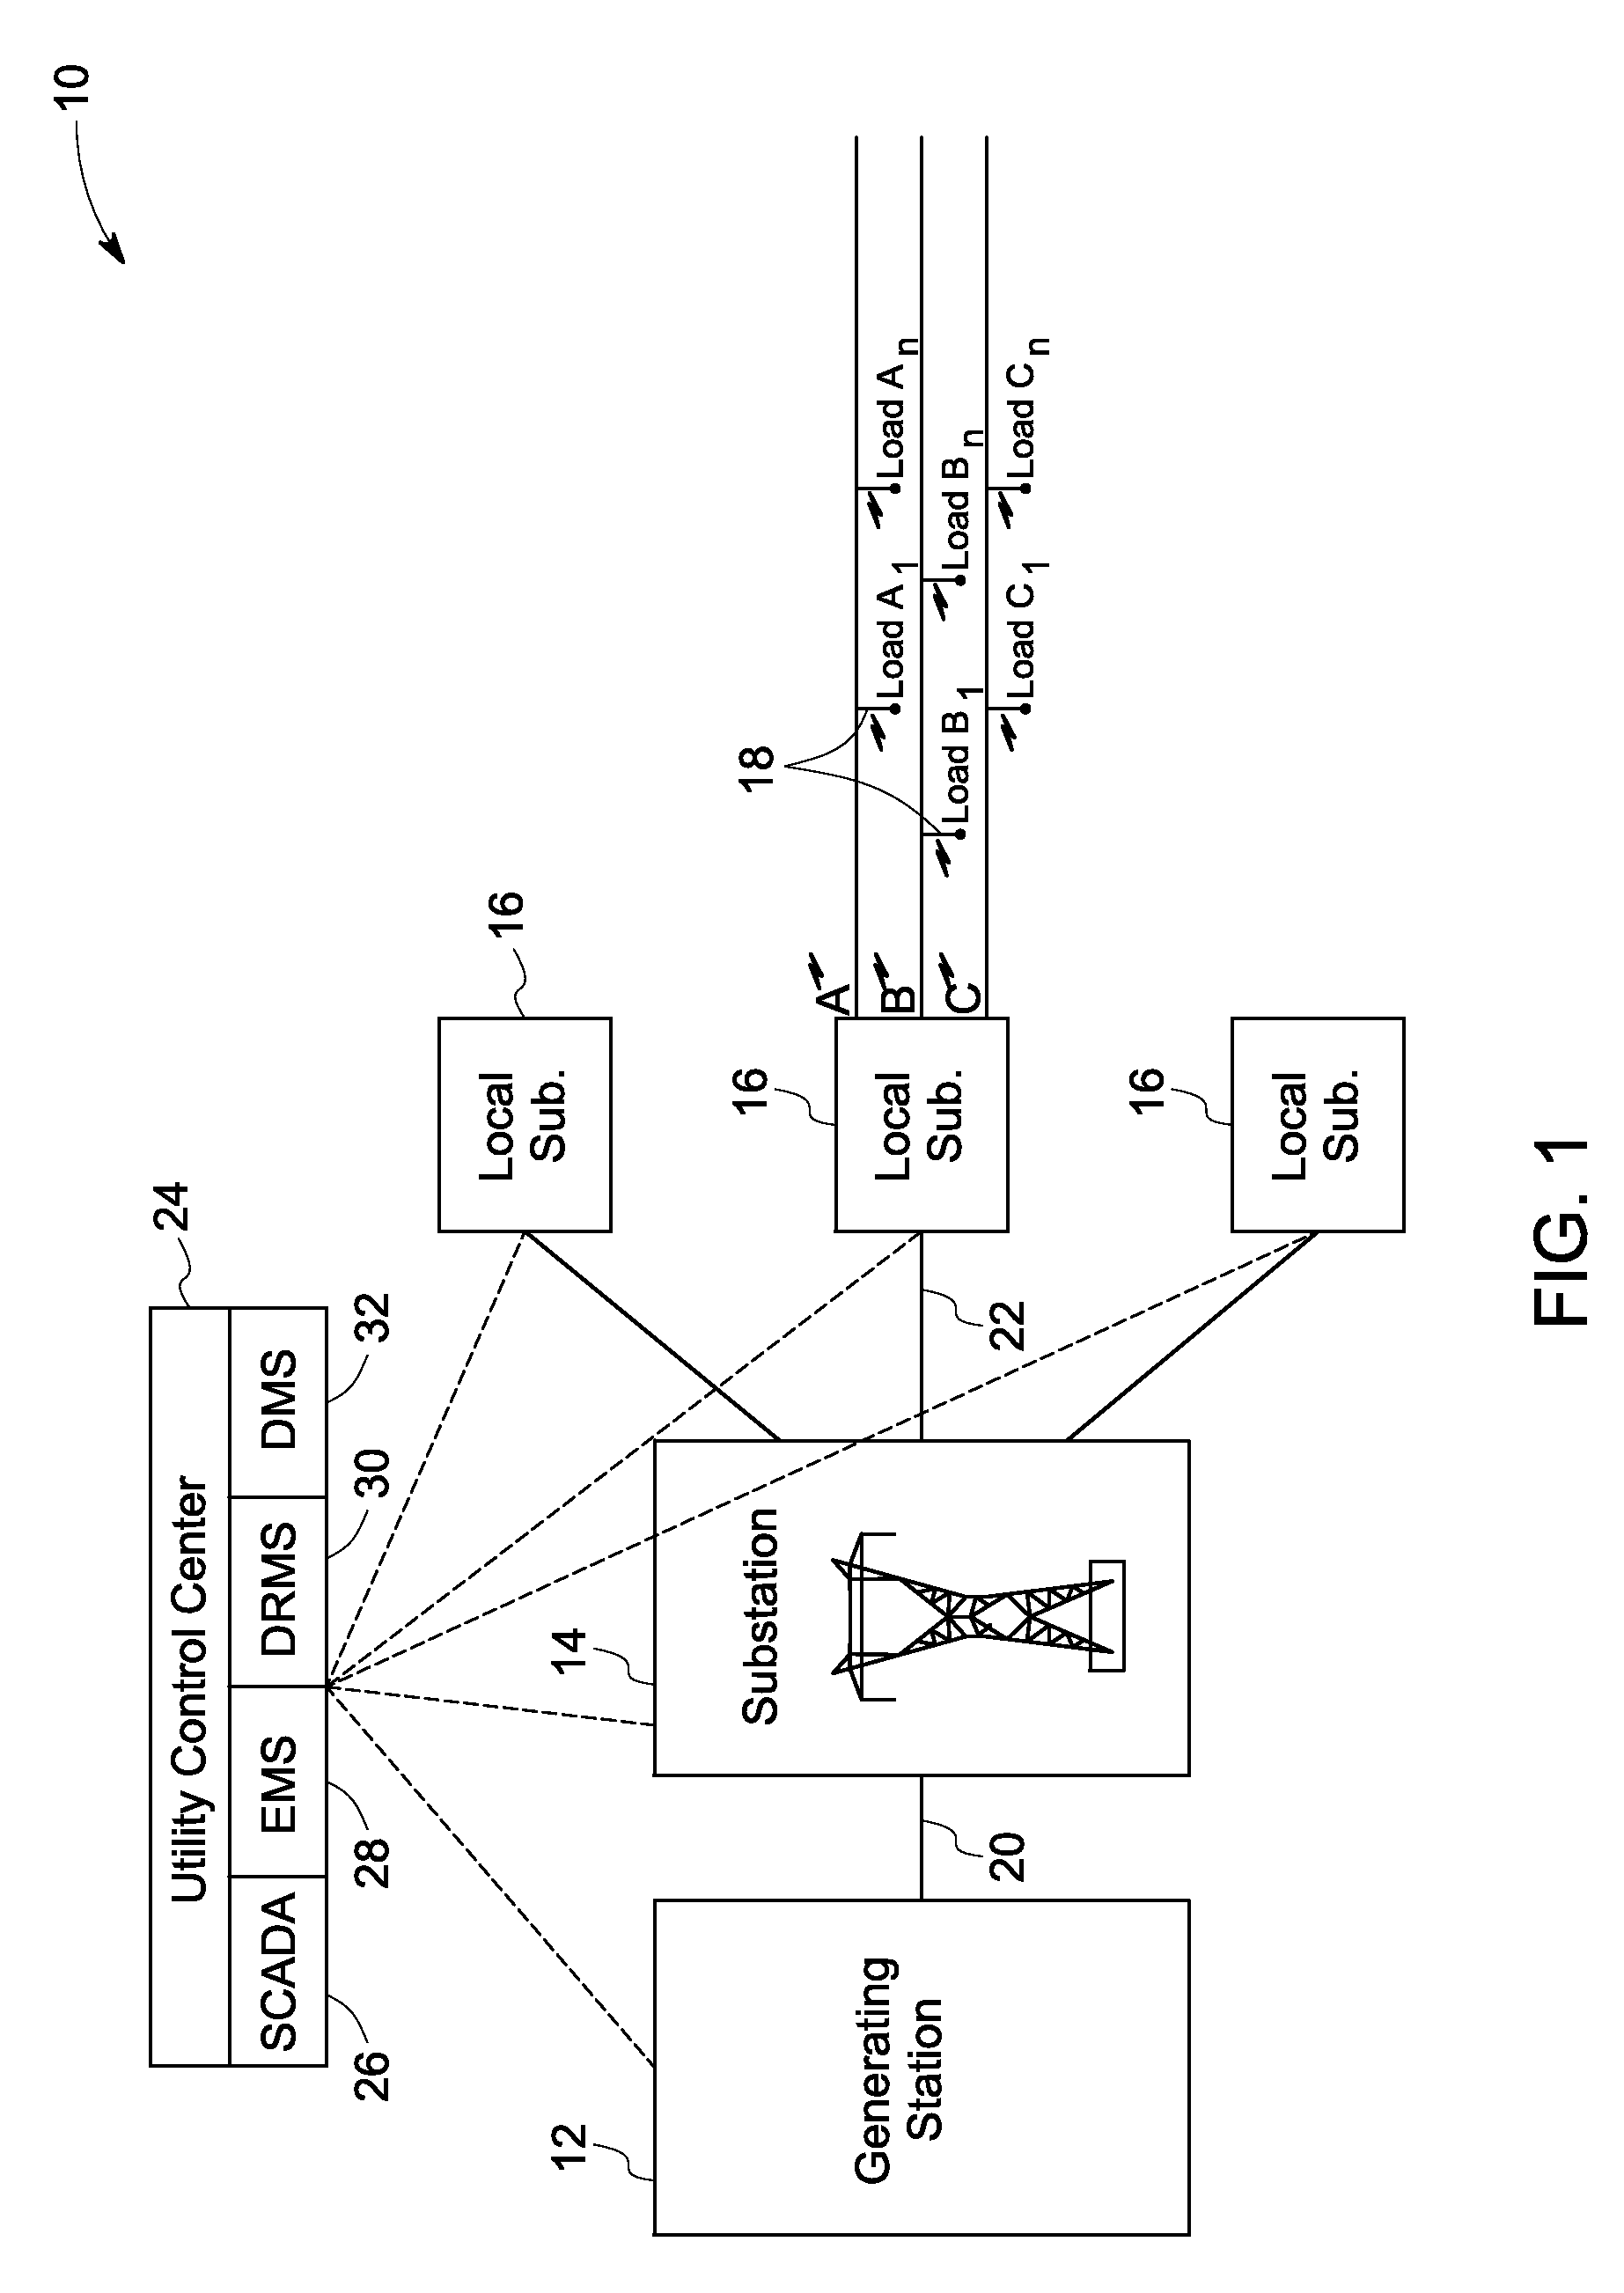 System and method for phase balancing in a power distribution system